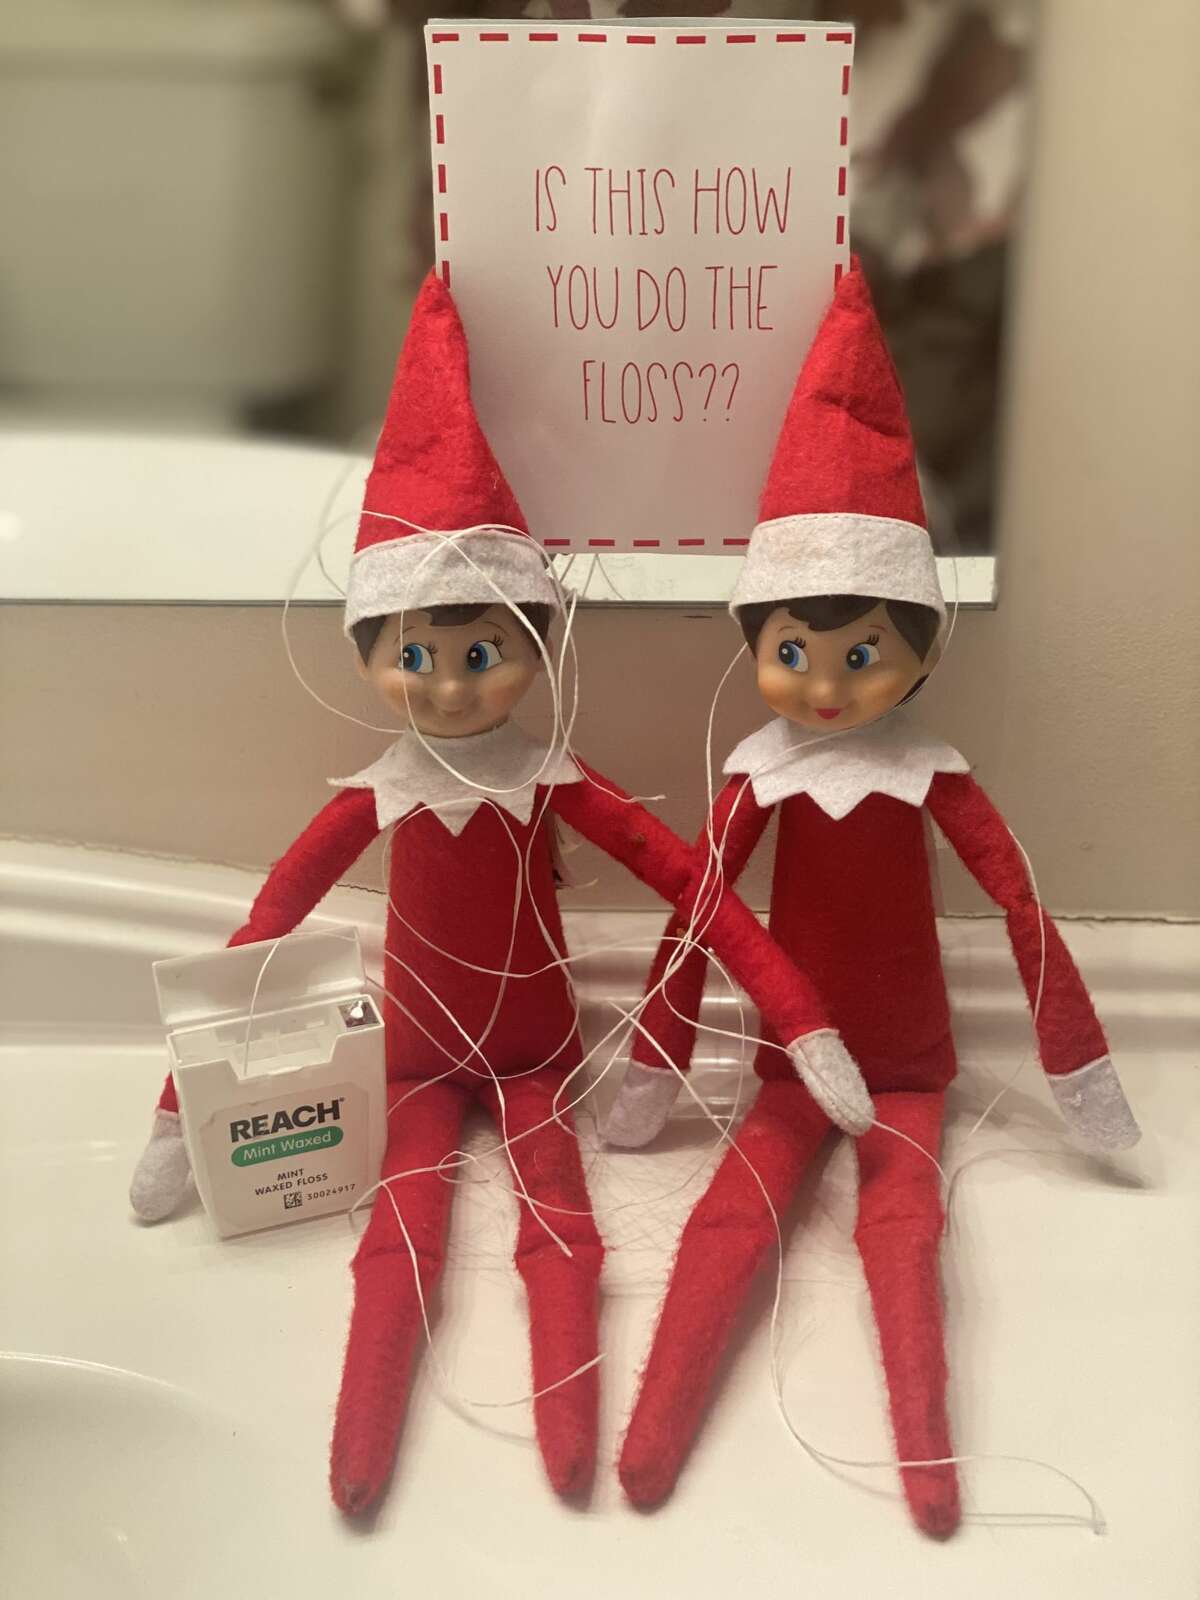 Readers show off what their elves have been doing in Capital Region homes this season.